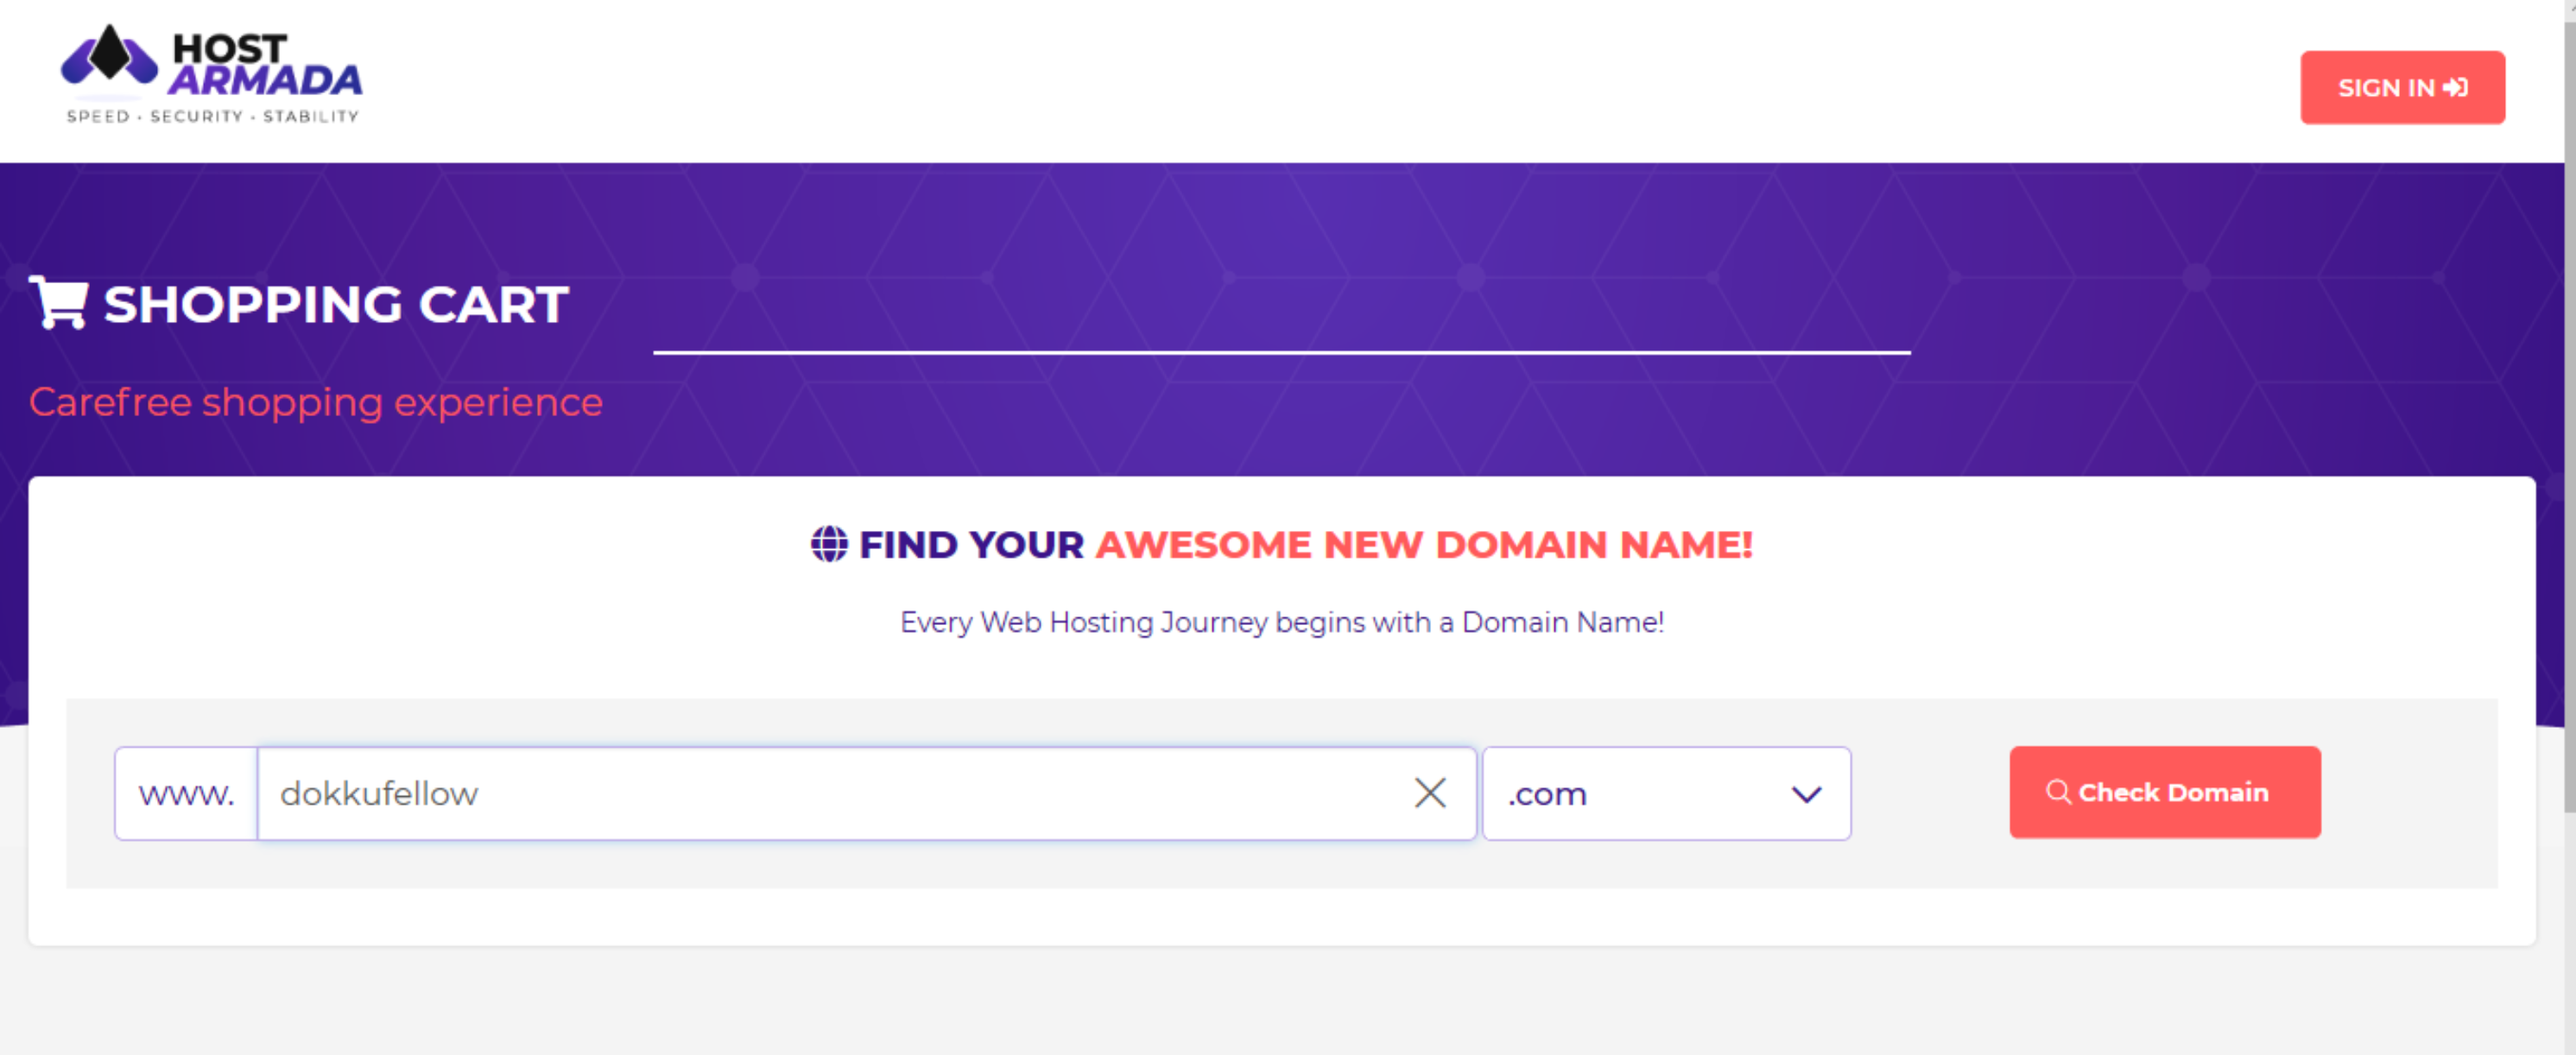 finding new domain name with HostArmada